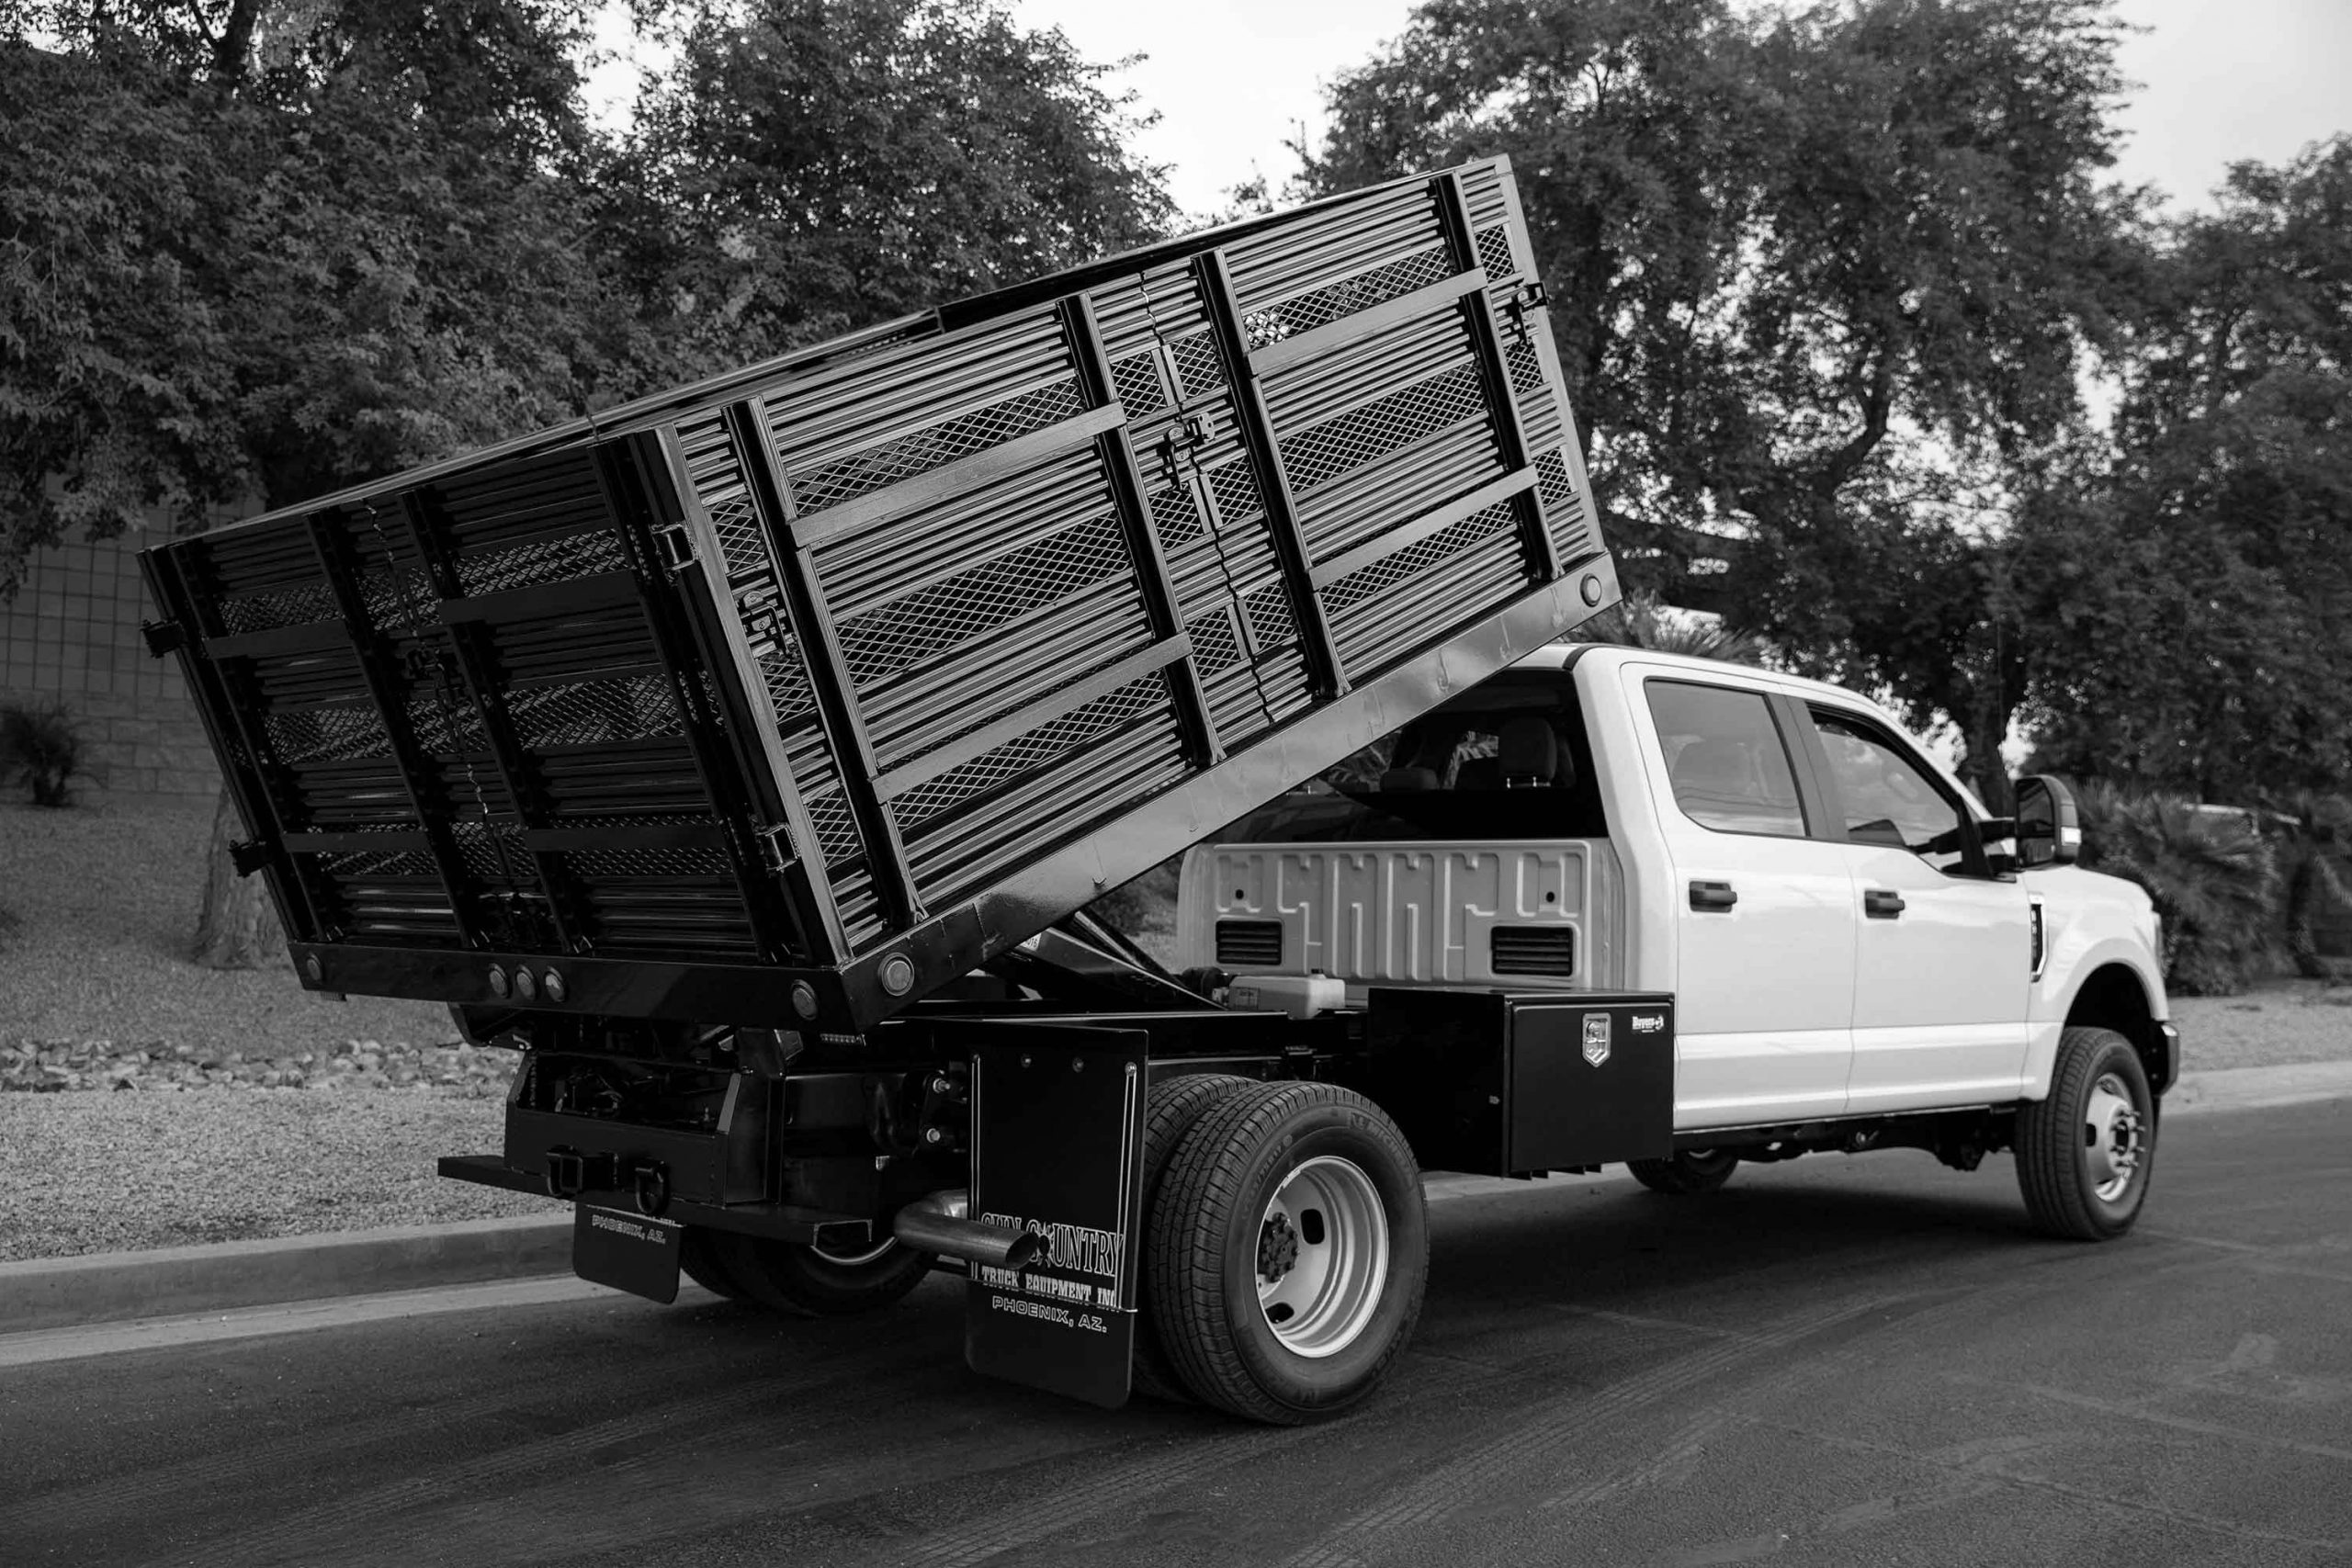 Flatbed Black and white truck